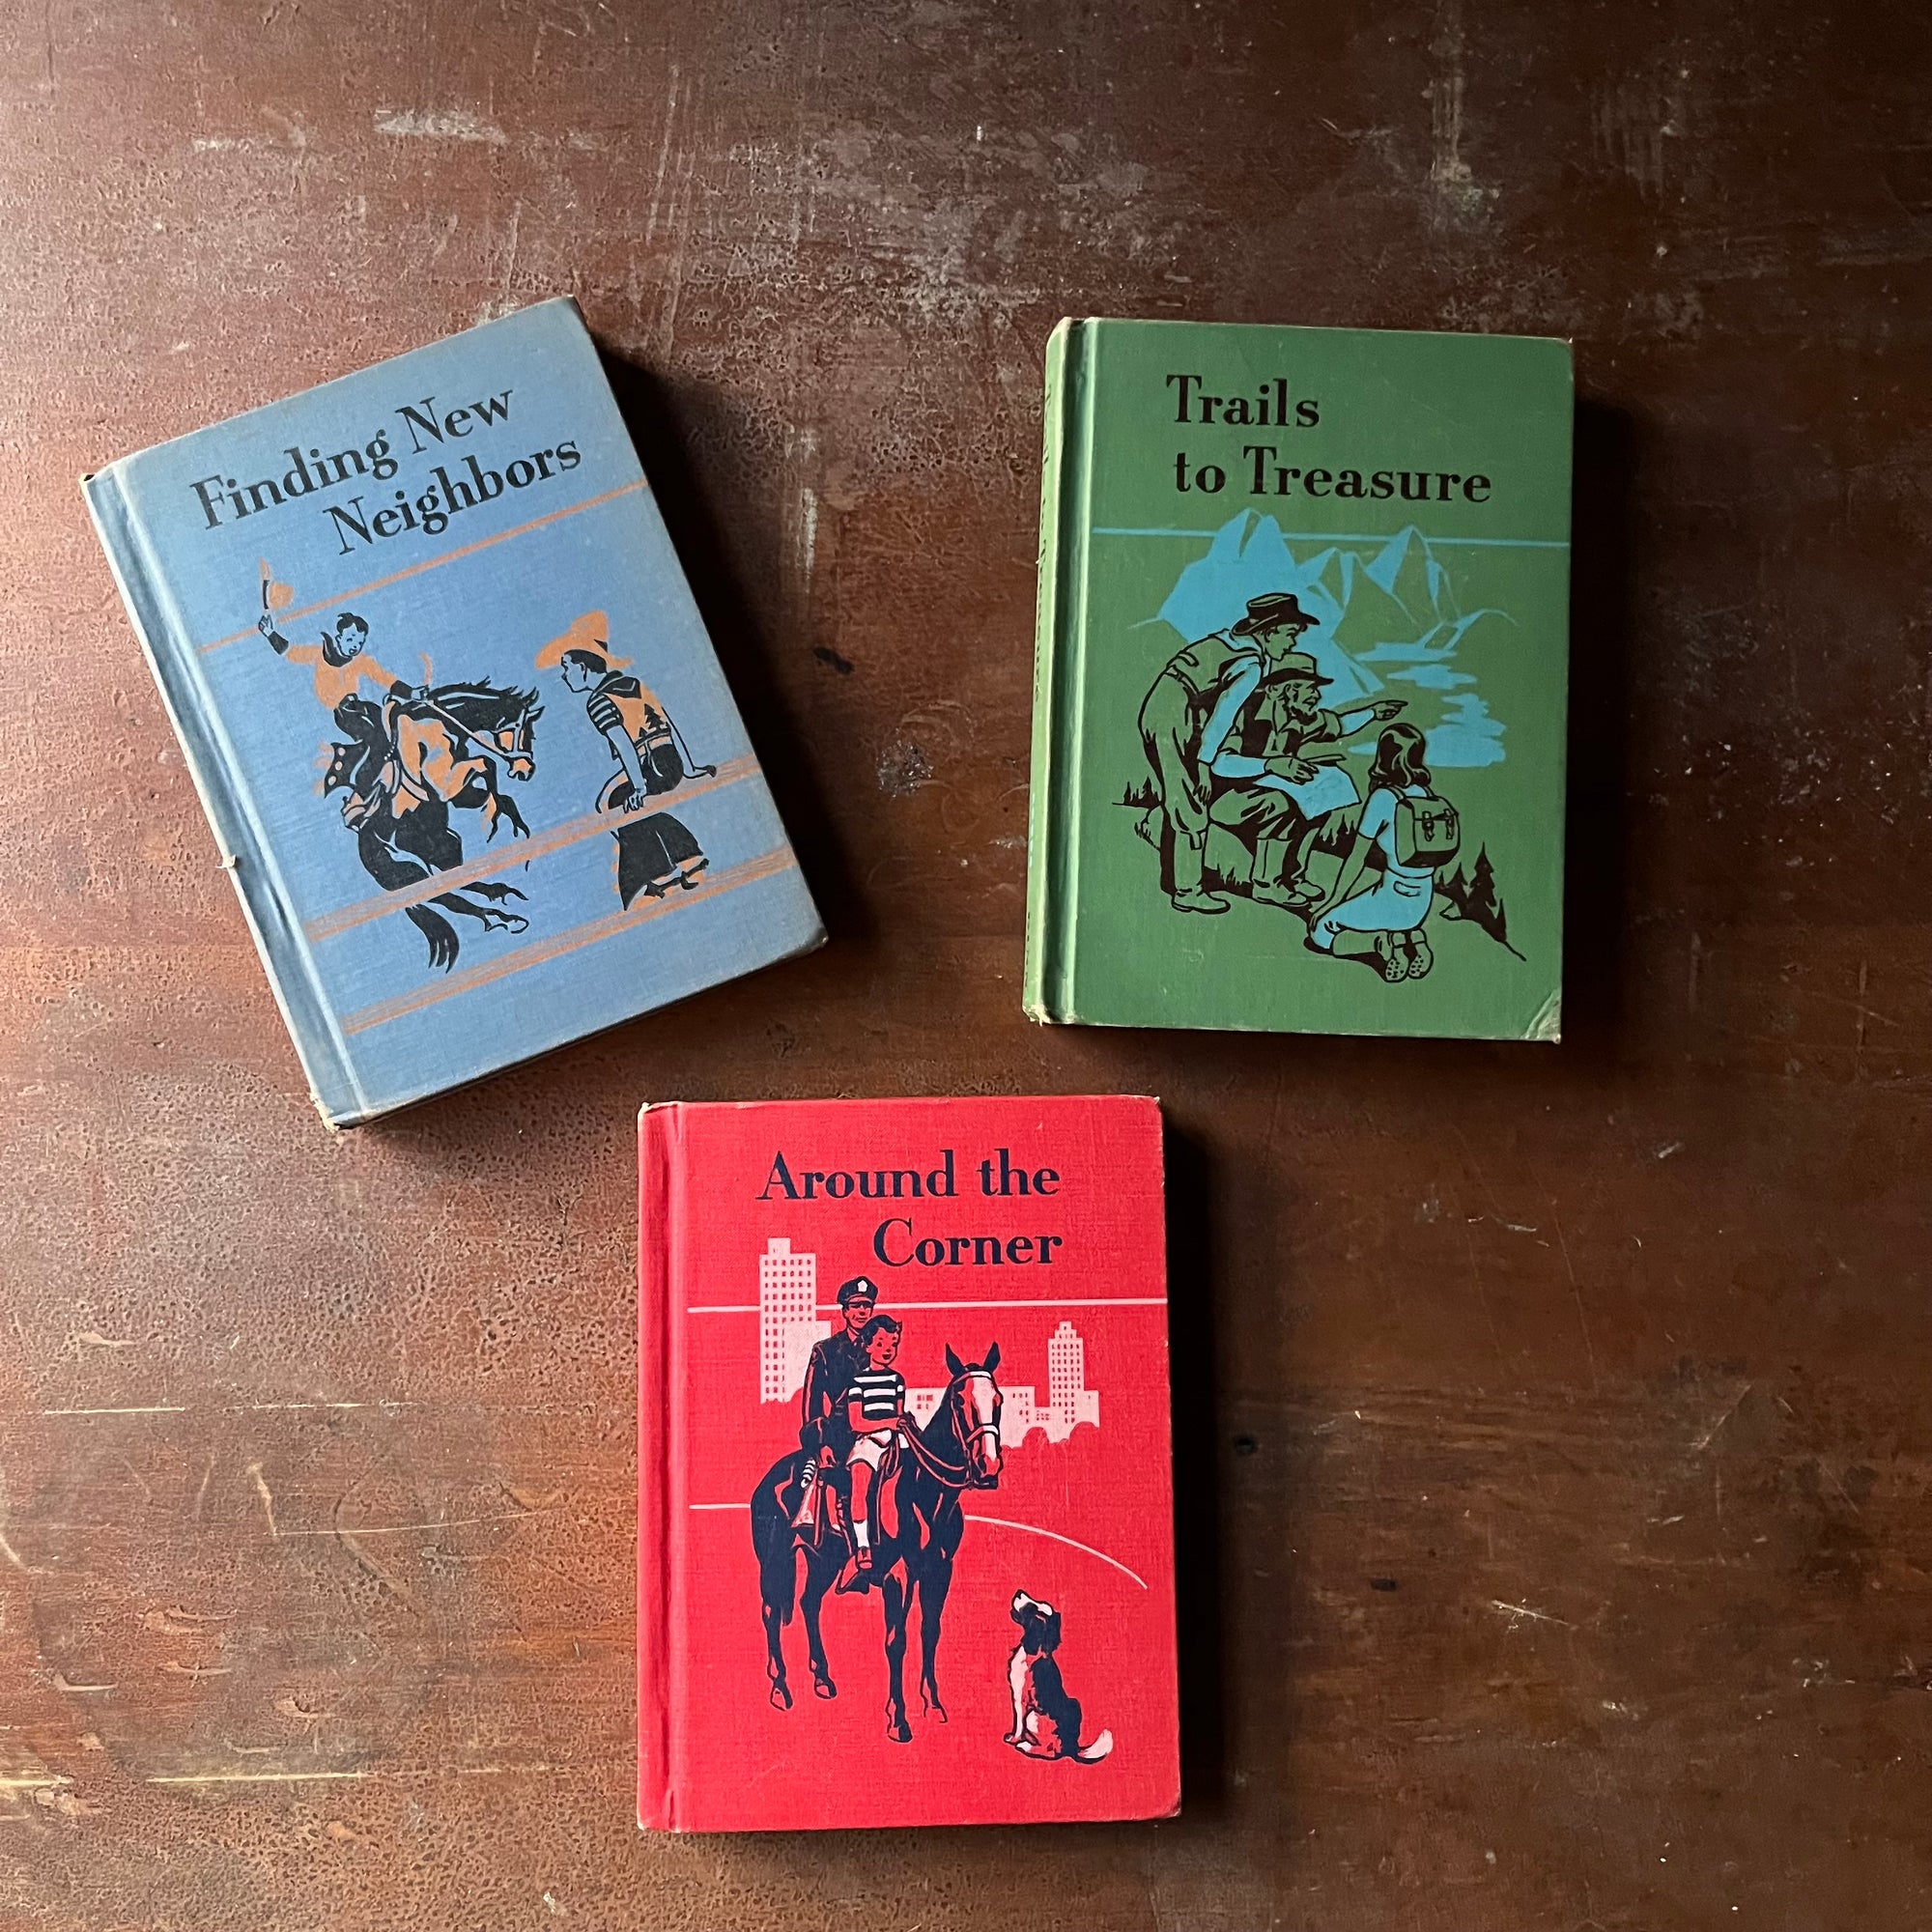 vintage elementary school books, vintage books learning to read - Ginn Basic Readers Vintage School Book Set-Around the Corner, Trails to Treasure, & Finding New Neighbors - view of the colorful front covers in red, green & blue